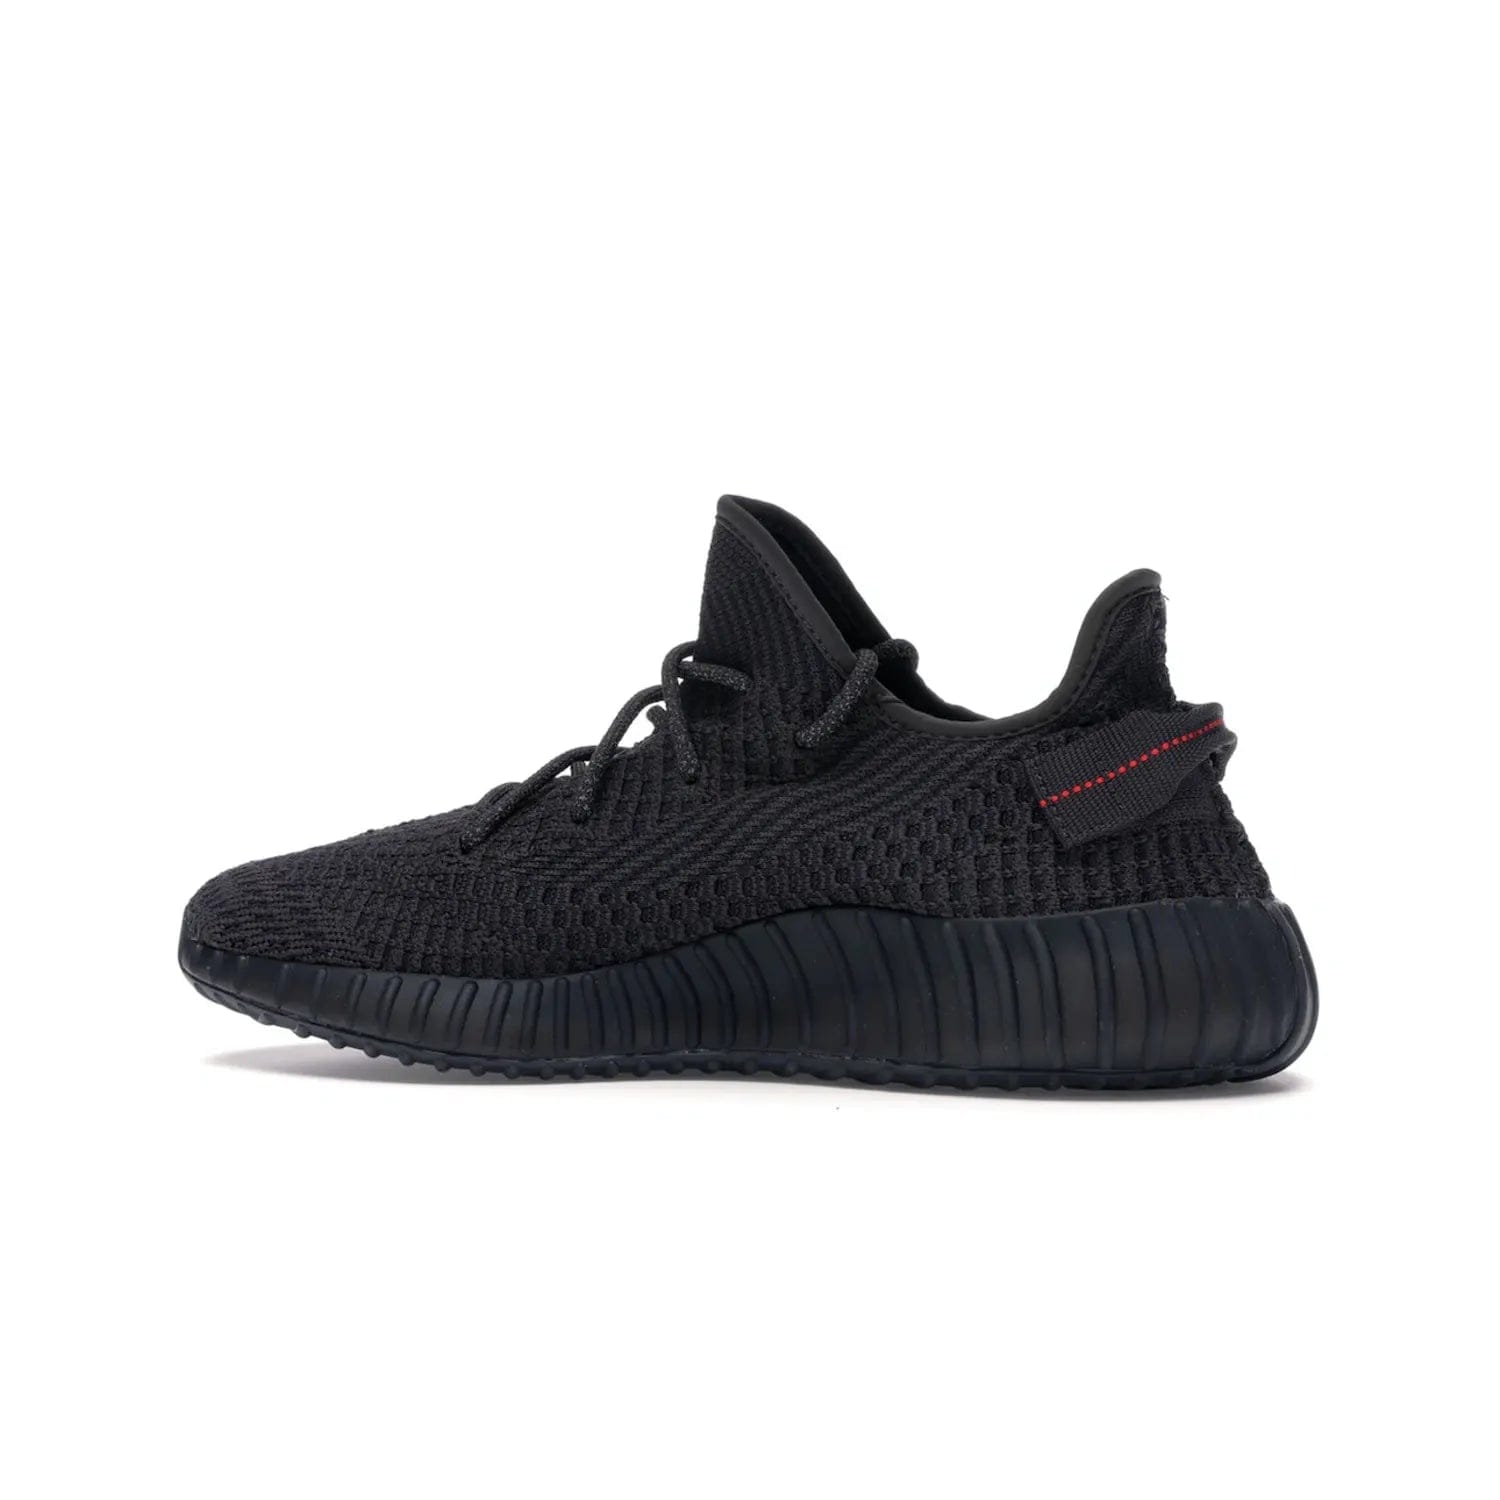 adidas Yeezy Boost 350 V2 Black (Non-Reflective) - Image 21 - Only at www.BallersClubKickz.com - A timeless, sleek silhouette crafted from quality materials. The adidas Yeezy Boost 350 V2 Black (Non-Reflective) brings style and sophistication. Get yours now!